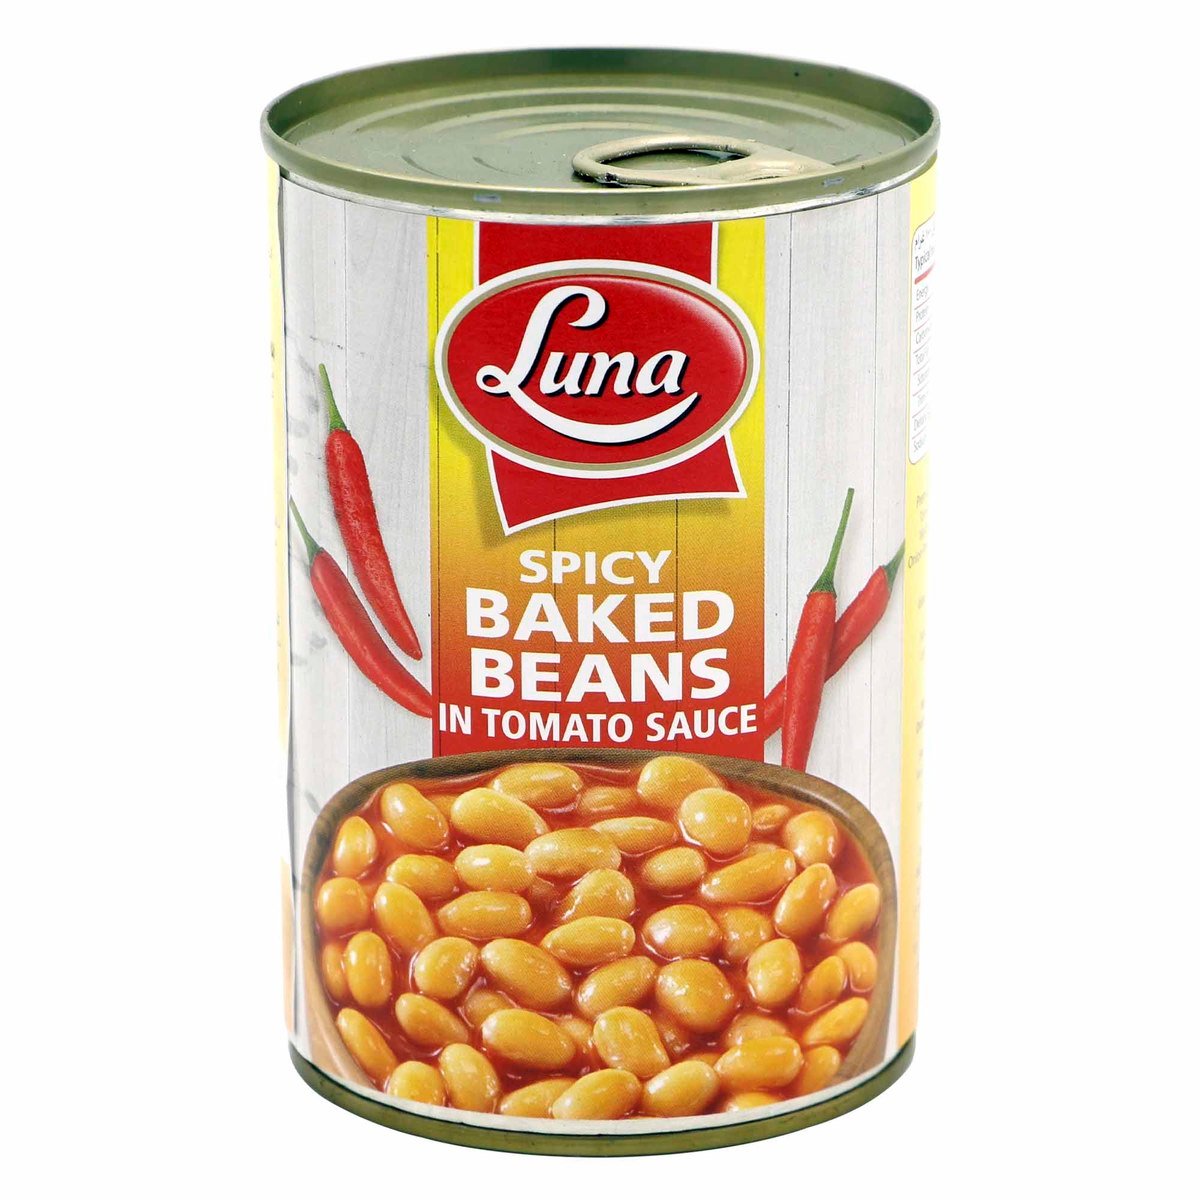 Luna Spicy Baked Beans In Tomato Sauce 400g